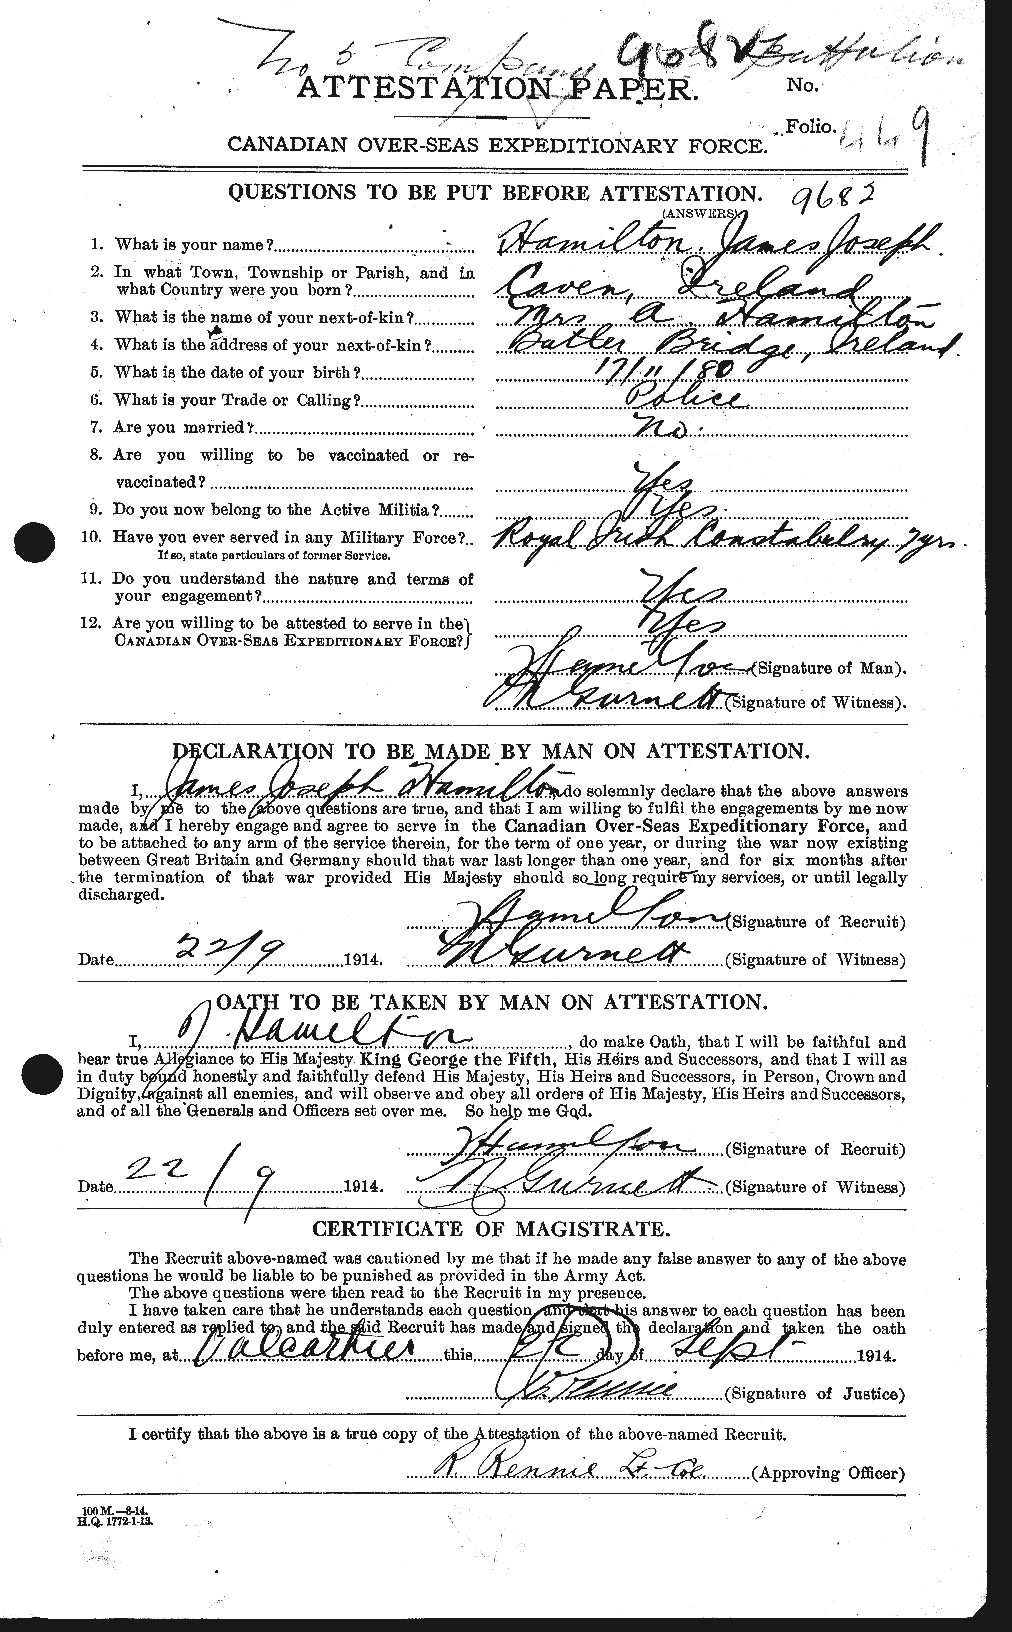 Personnel Records of the First World War - CEF 372985a